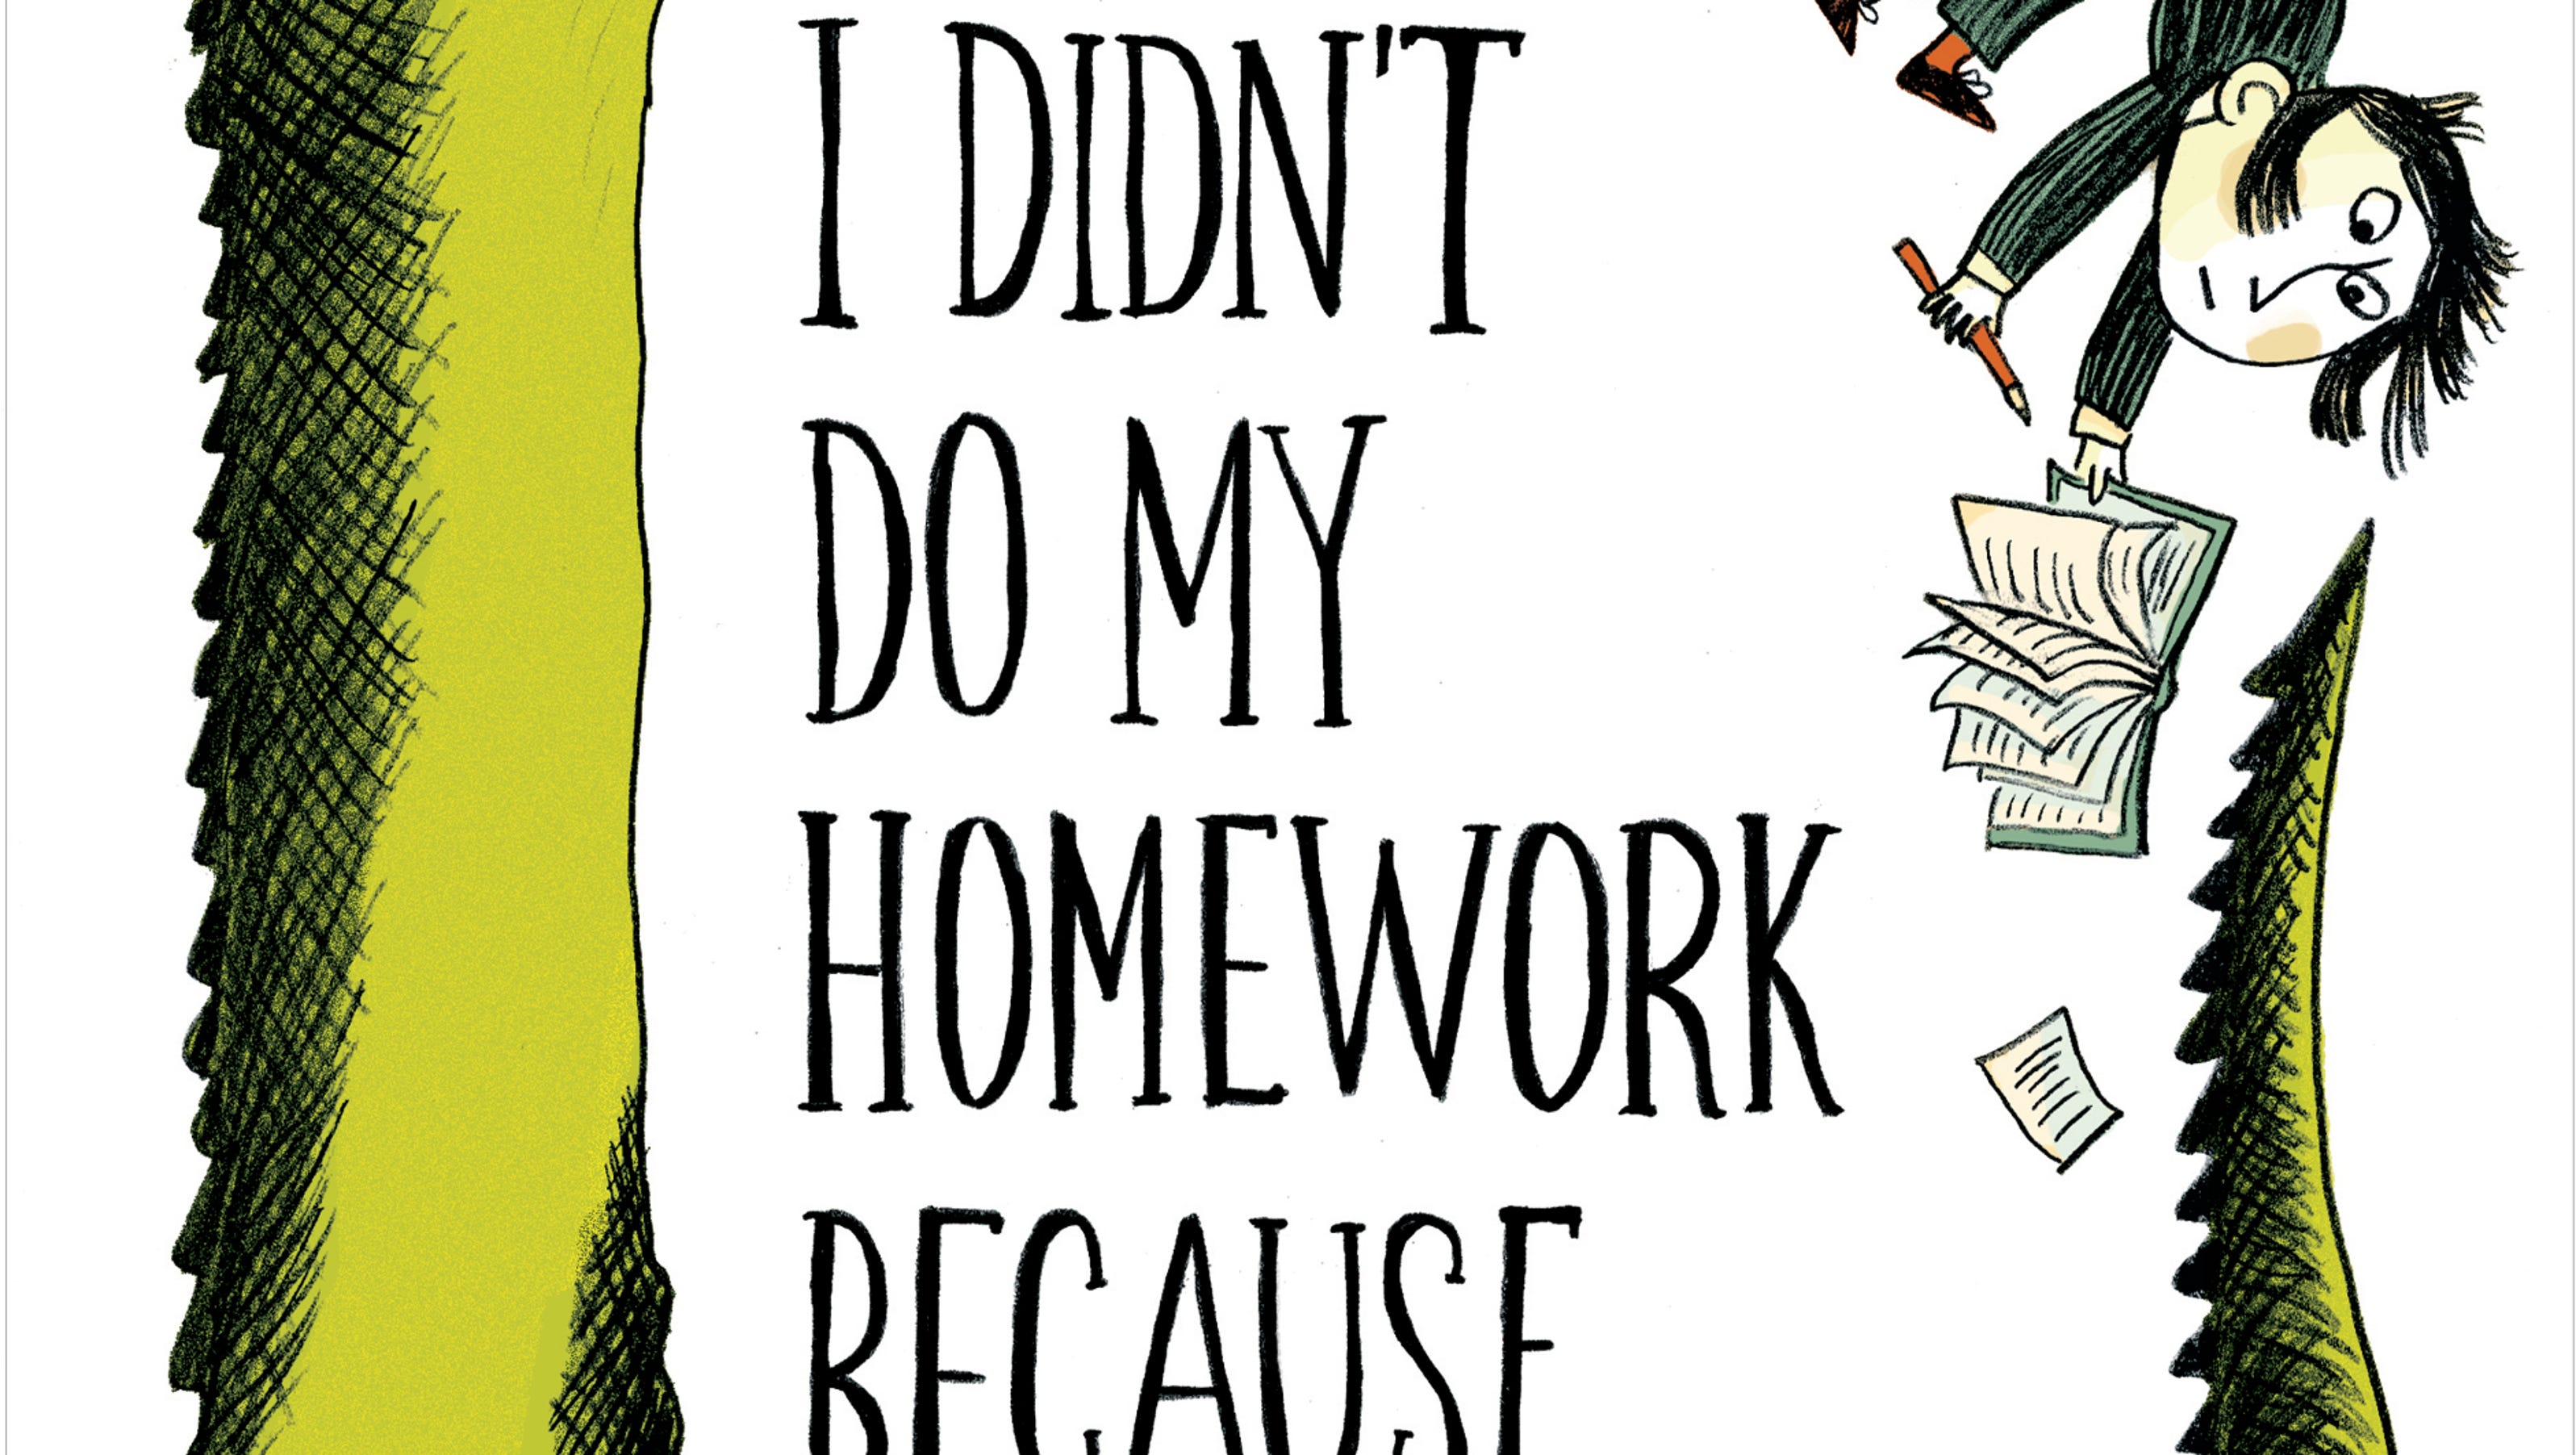 You can do your homework. My homework. Your homework. Do my homework. I didn't do my homework because.